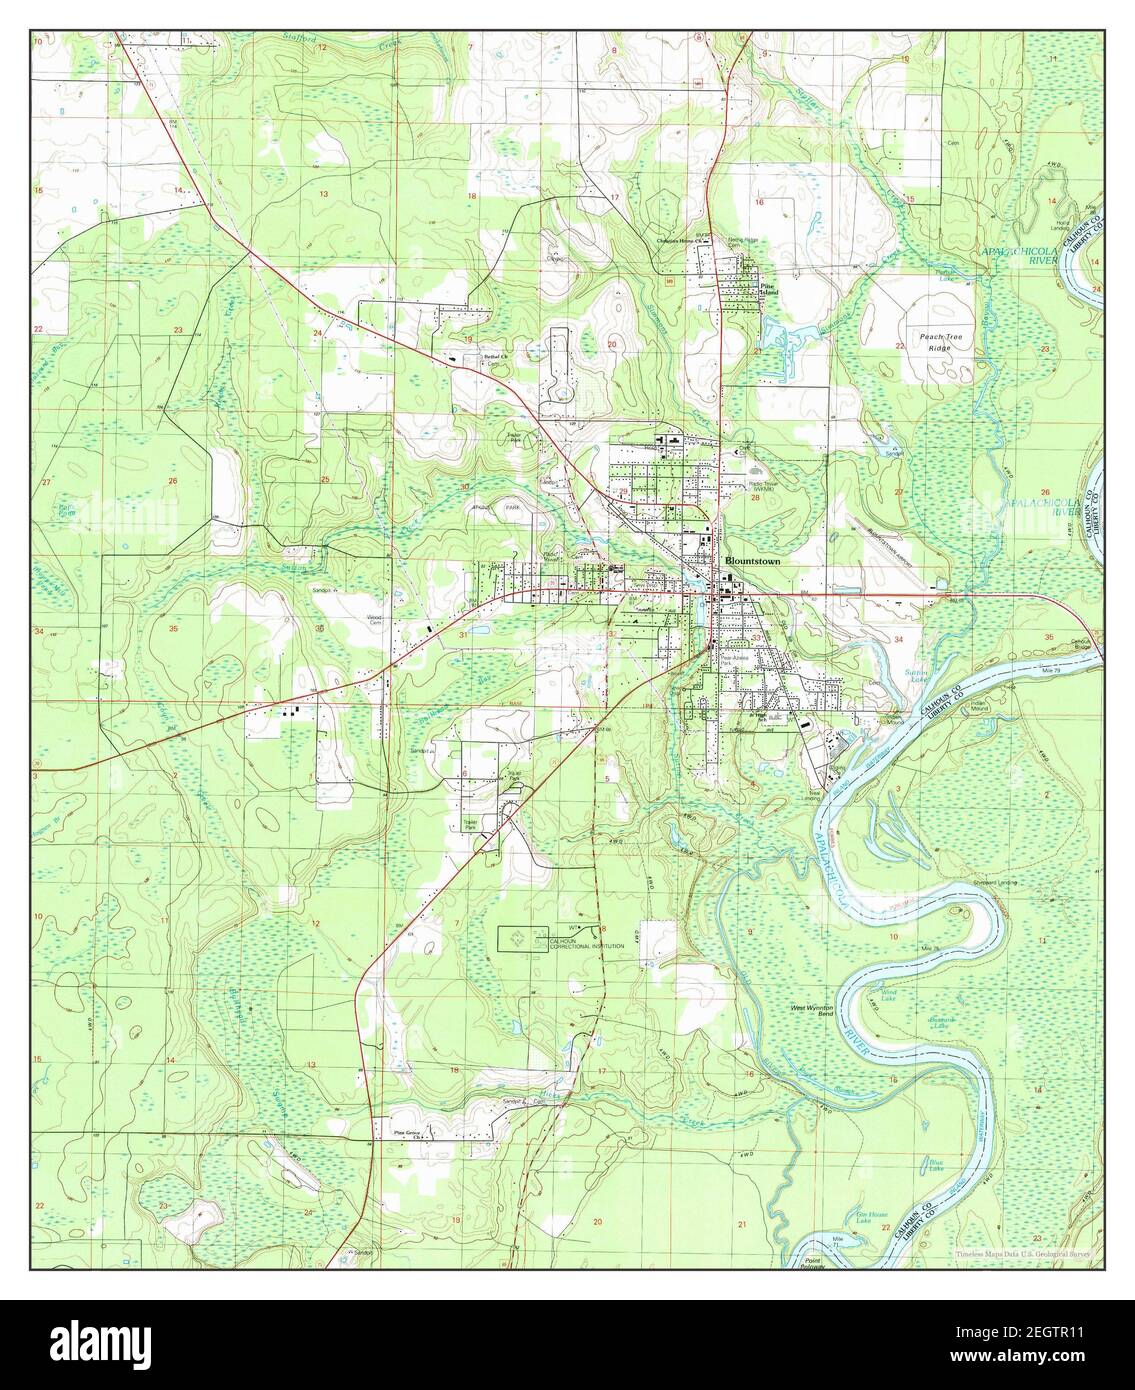 Blountstown, Florida, map 1990, 1:24000, United States of America by Timeless Maps, data U.S. Geological Survey Stock Photo